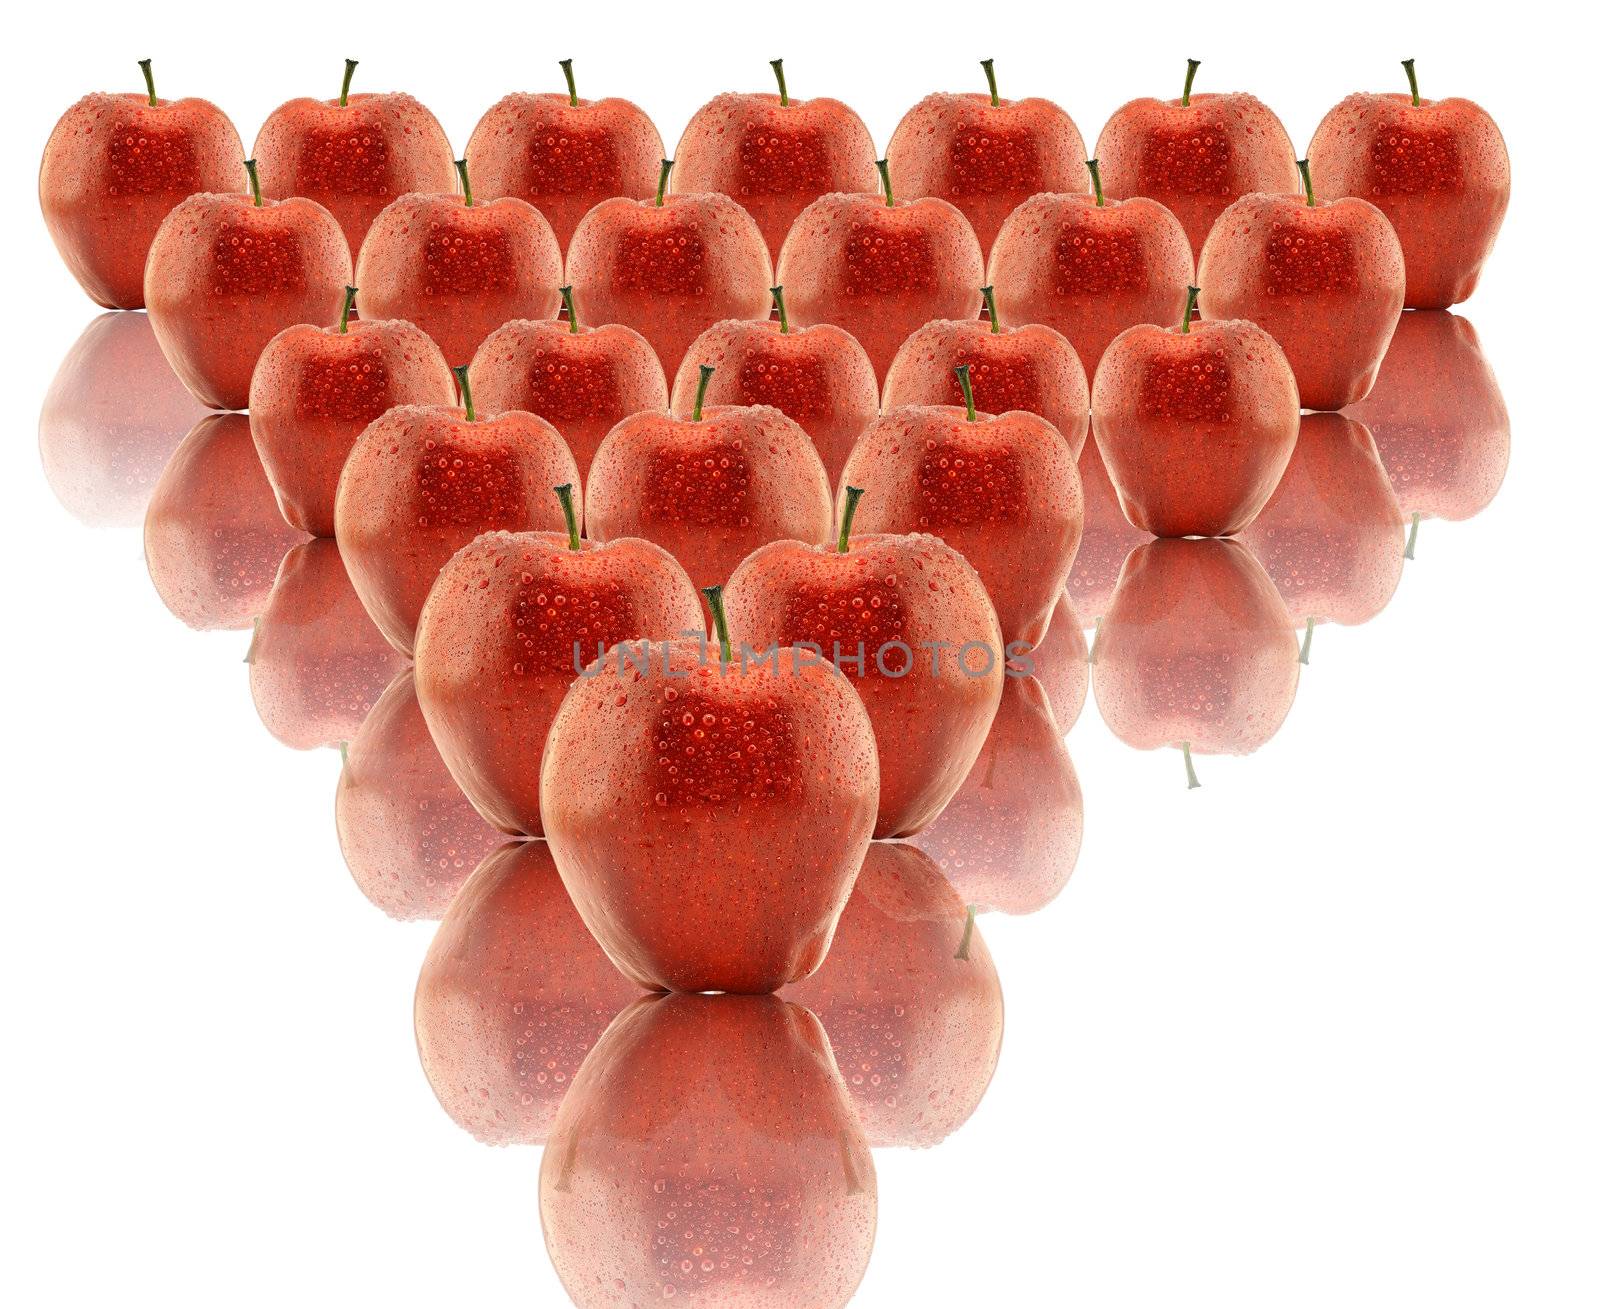 large group of red apples in a row. Horizontal shape